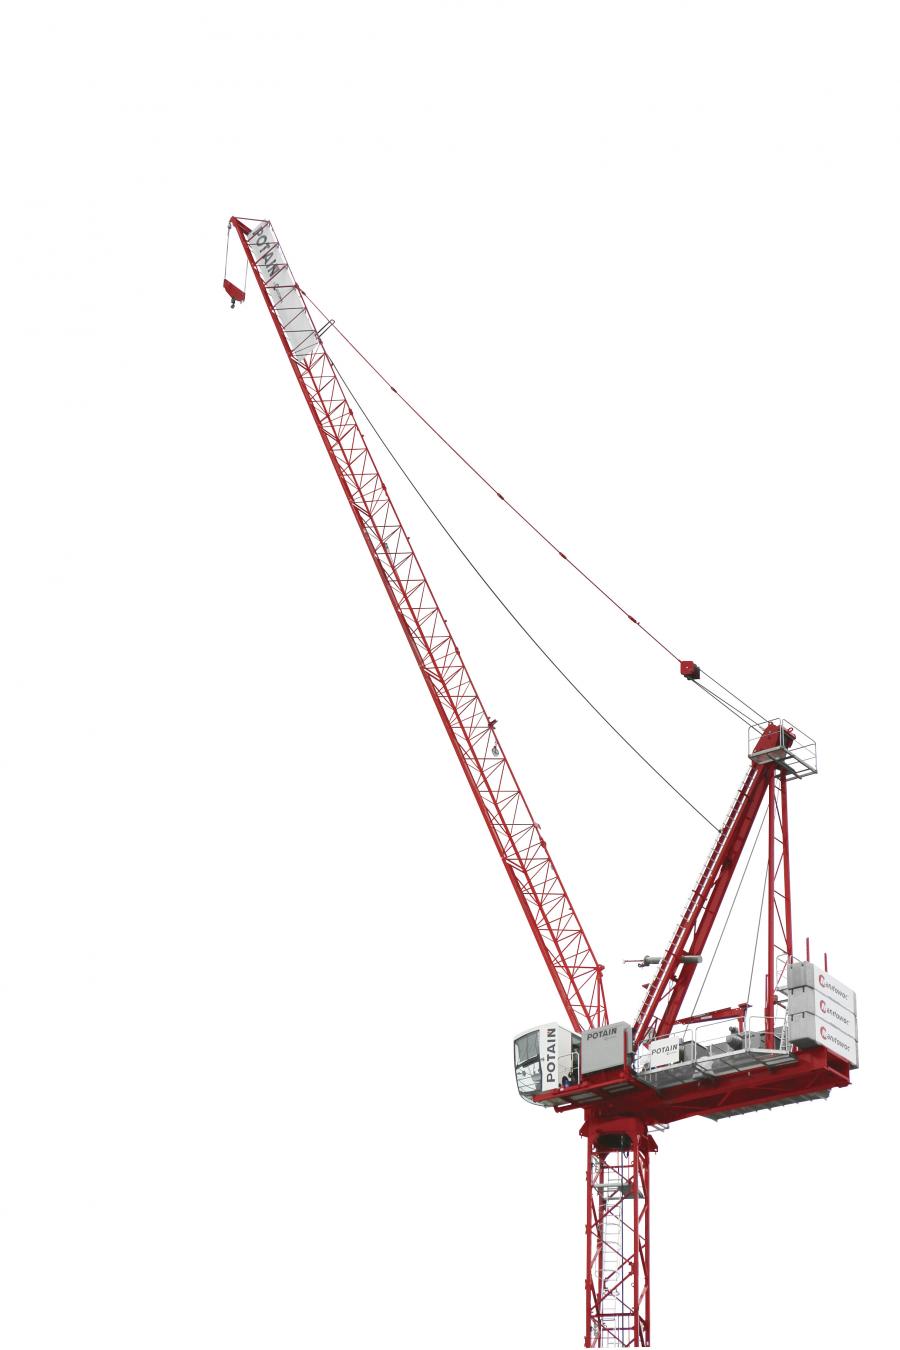 The MR 160 C offers an 11-ton capacity, a tip load of 2.6 tons and a maximum jib length of 164 ft.